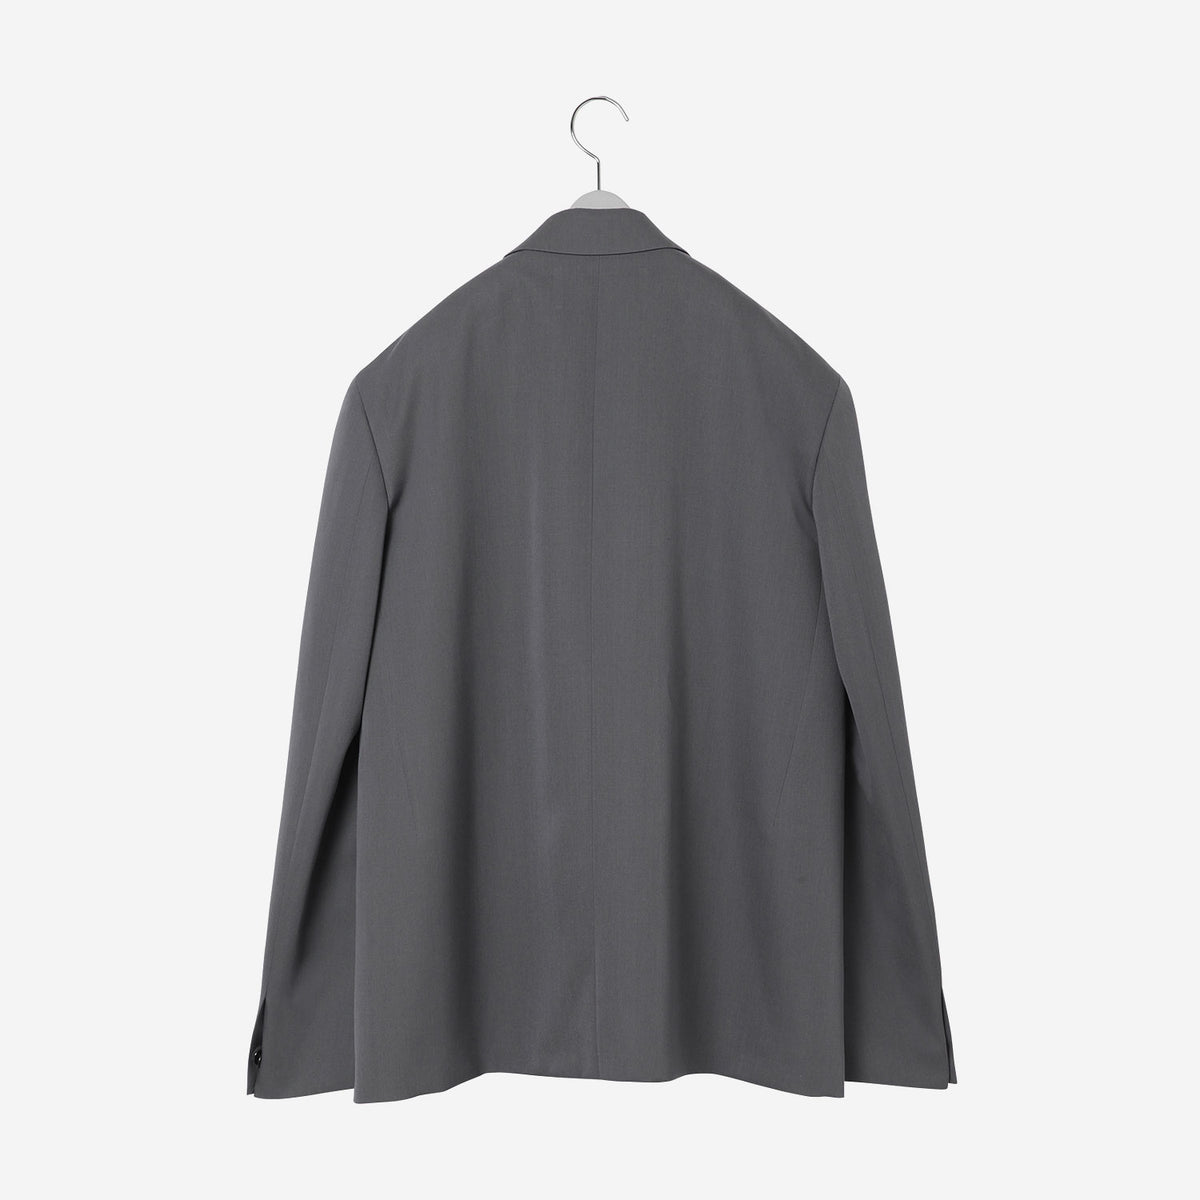 Minimalcut Double Jacket / gray – th products